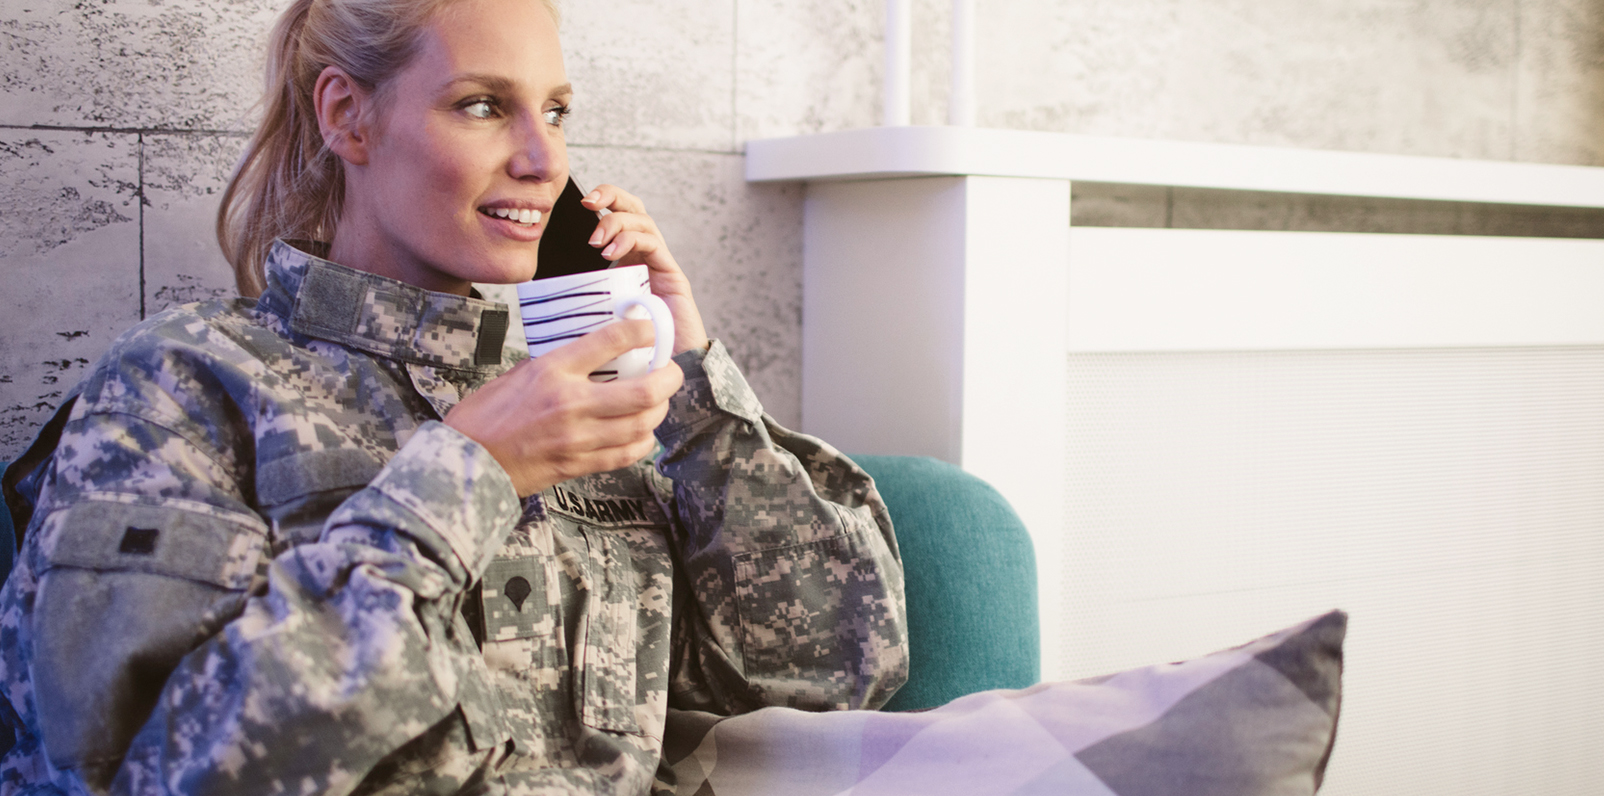 Military service woman on a cell phone learning about an exclusive offer.